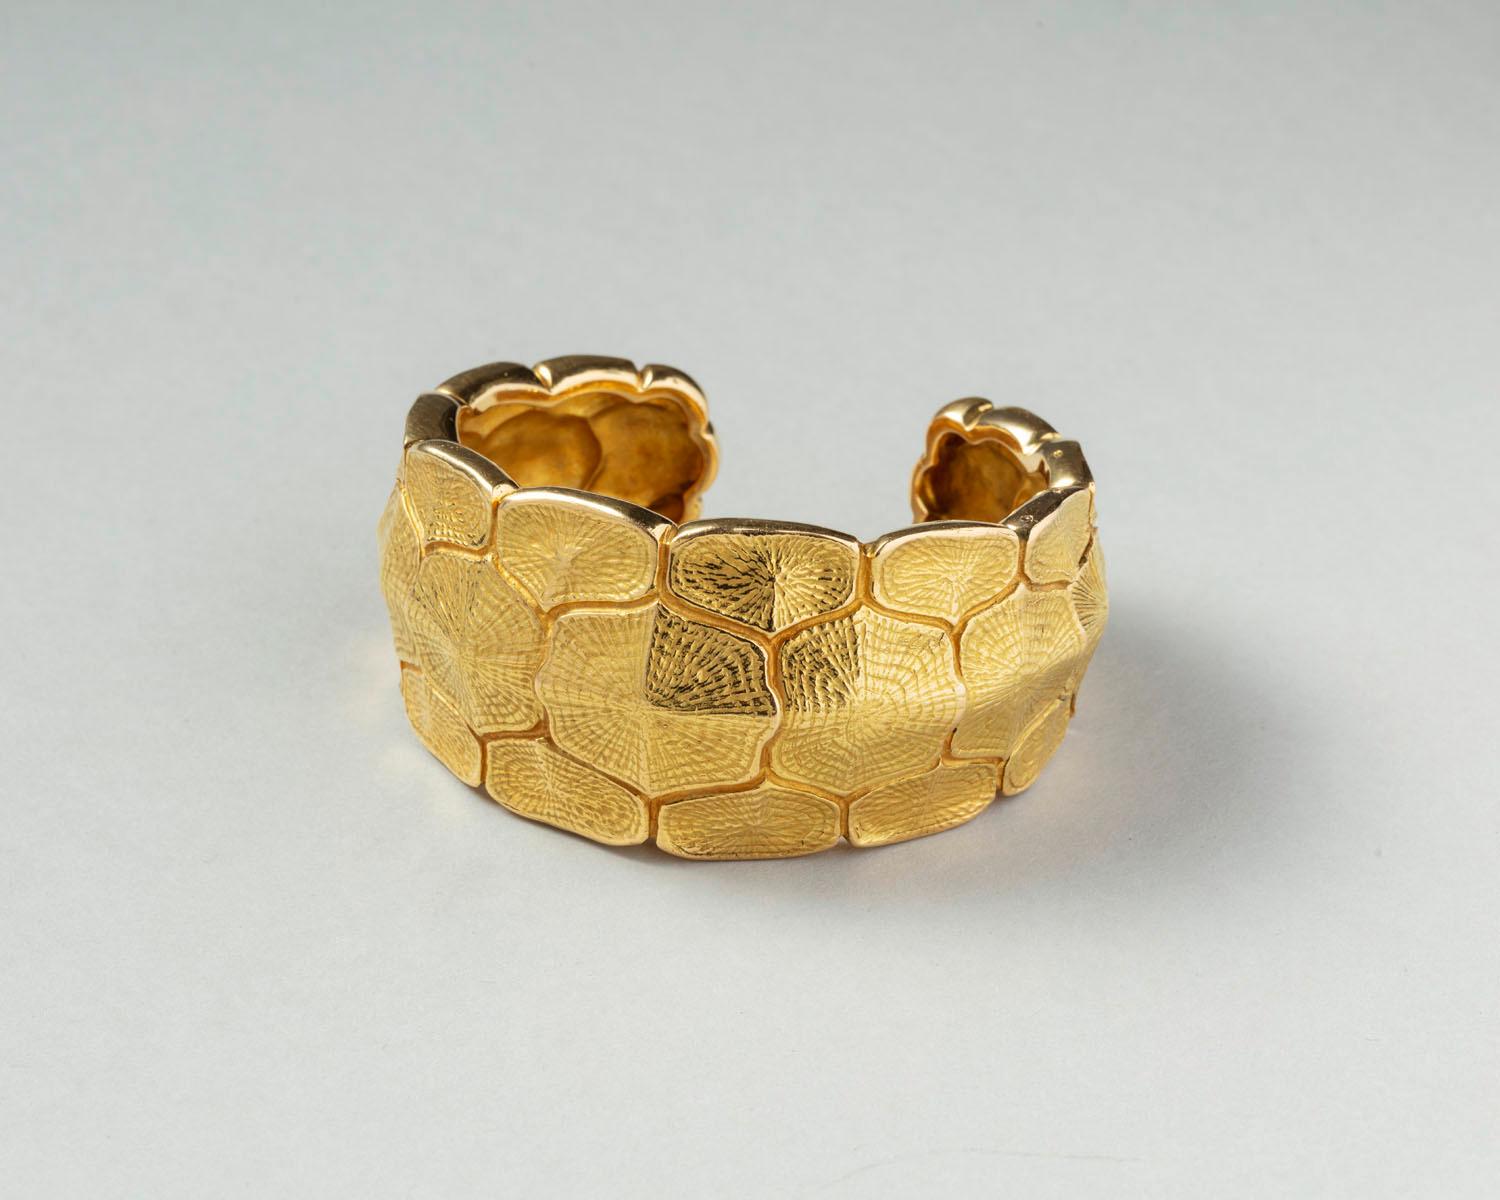 A heavy 18 carat gold turtle-shell cuff bracelet, it is seamlessly hinged, signed and numbered: Fred Paris, KE 98656, model: Galapagos, 1990.

weight: 92.19 grams
dimensions inside: 5.6 x 4.5 cm (for wrist 15.5 - 16.5 cm)
width: 3.5 - 2.4 cm 
